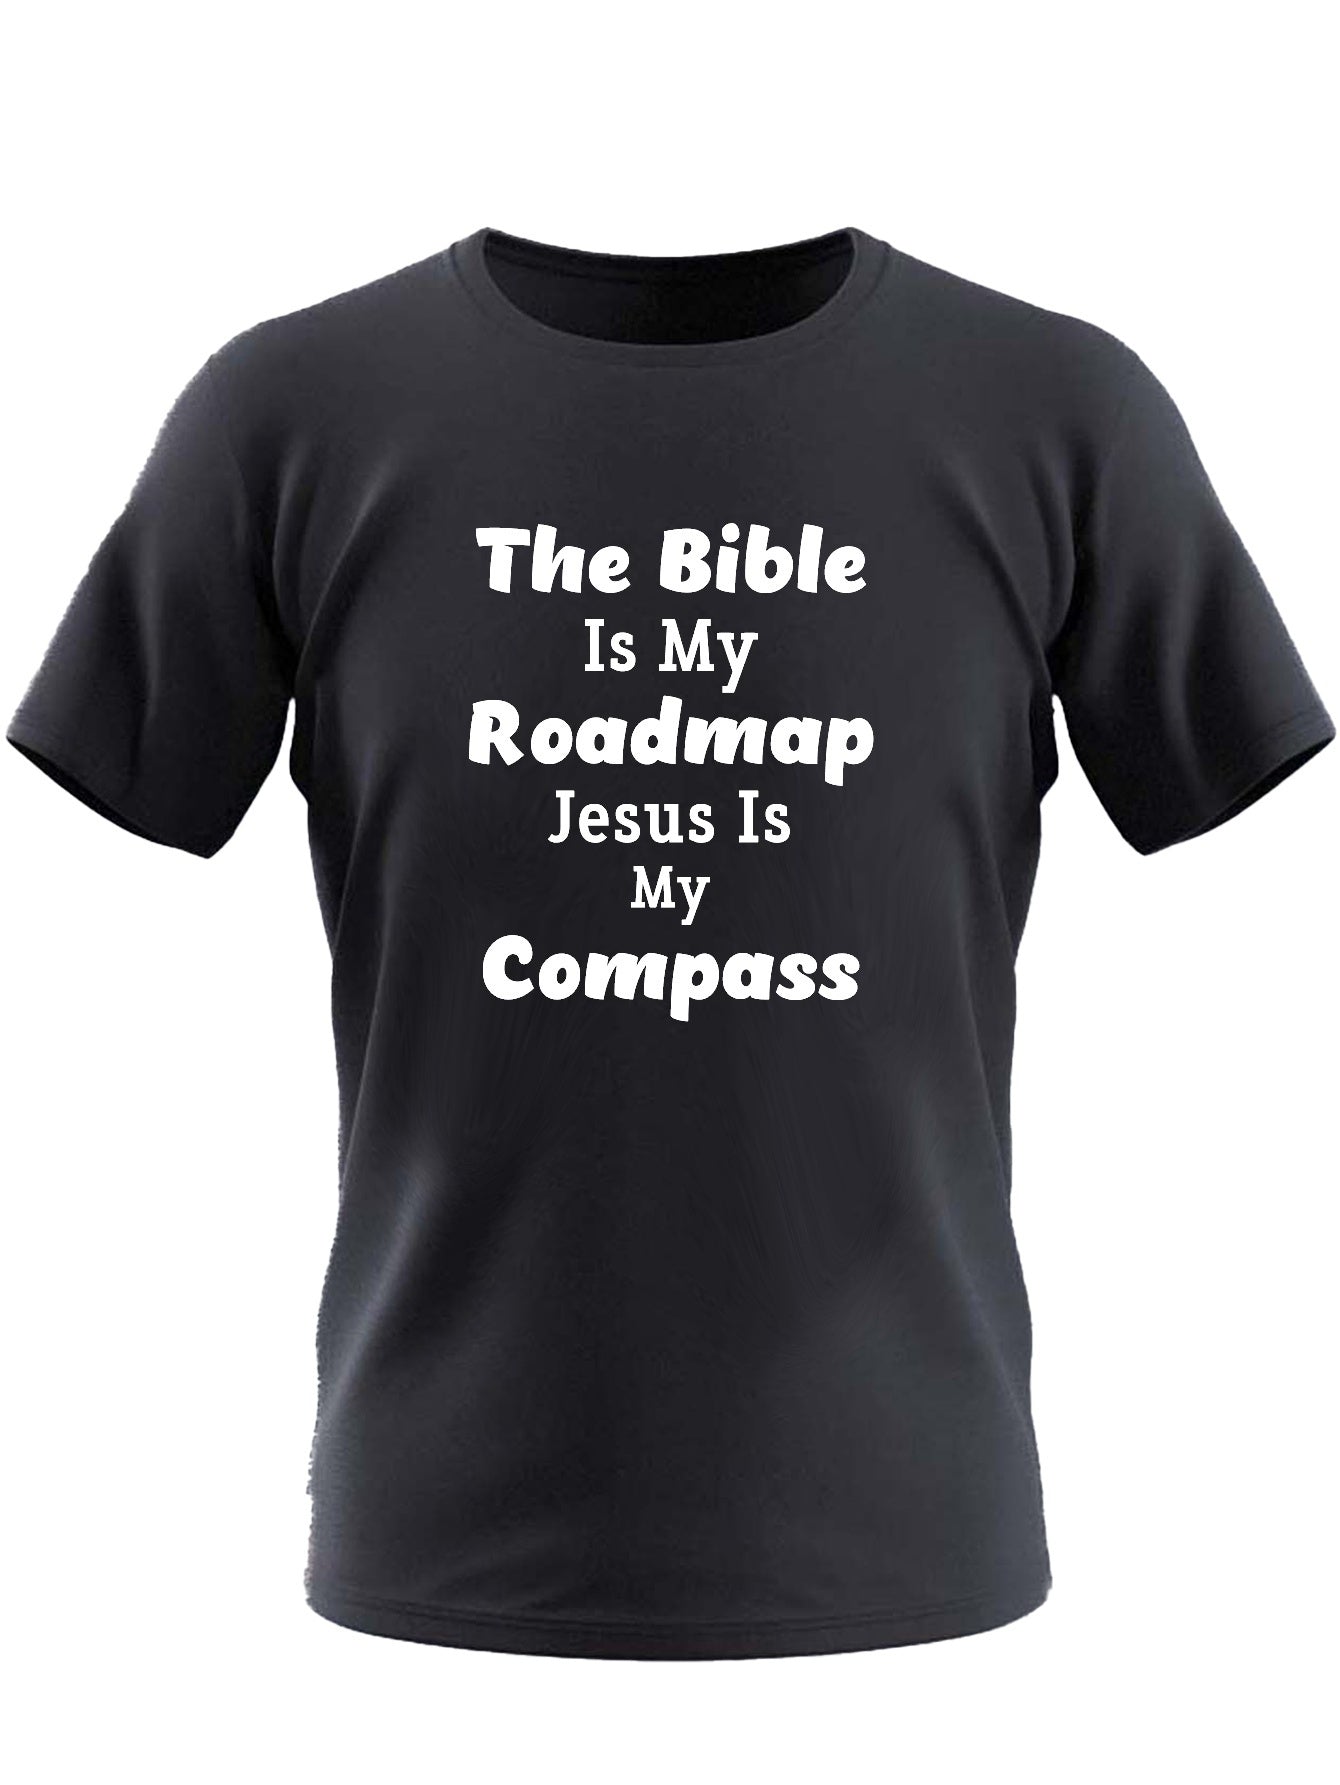 The Bible Is My Roadmap And Jesus Is My Compass  Men's Christian T-shirt claimedbygoddesigns